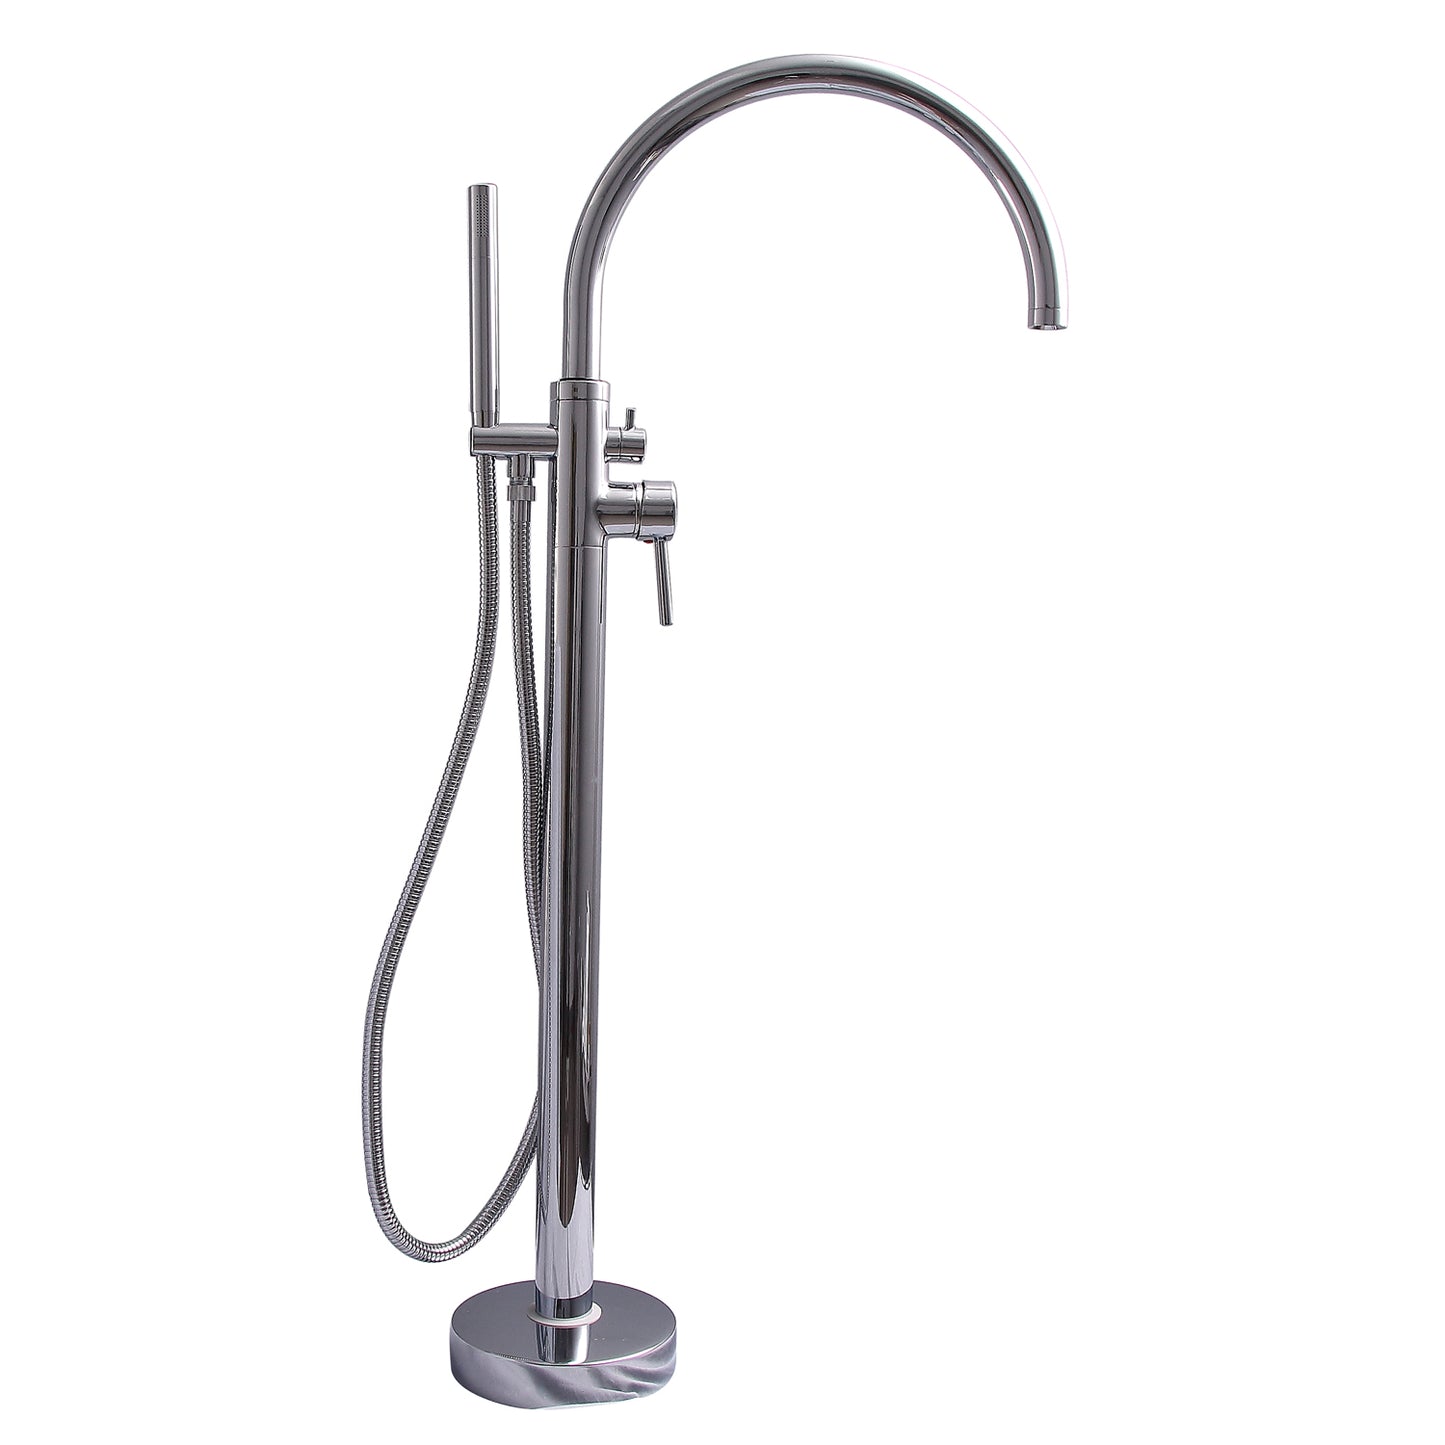 Bianca Floor-Mount Gooseneck Tub Faucet with Hand Shower in Chrome